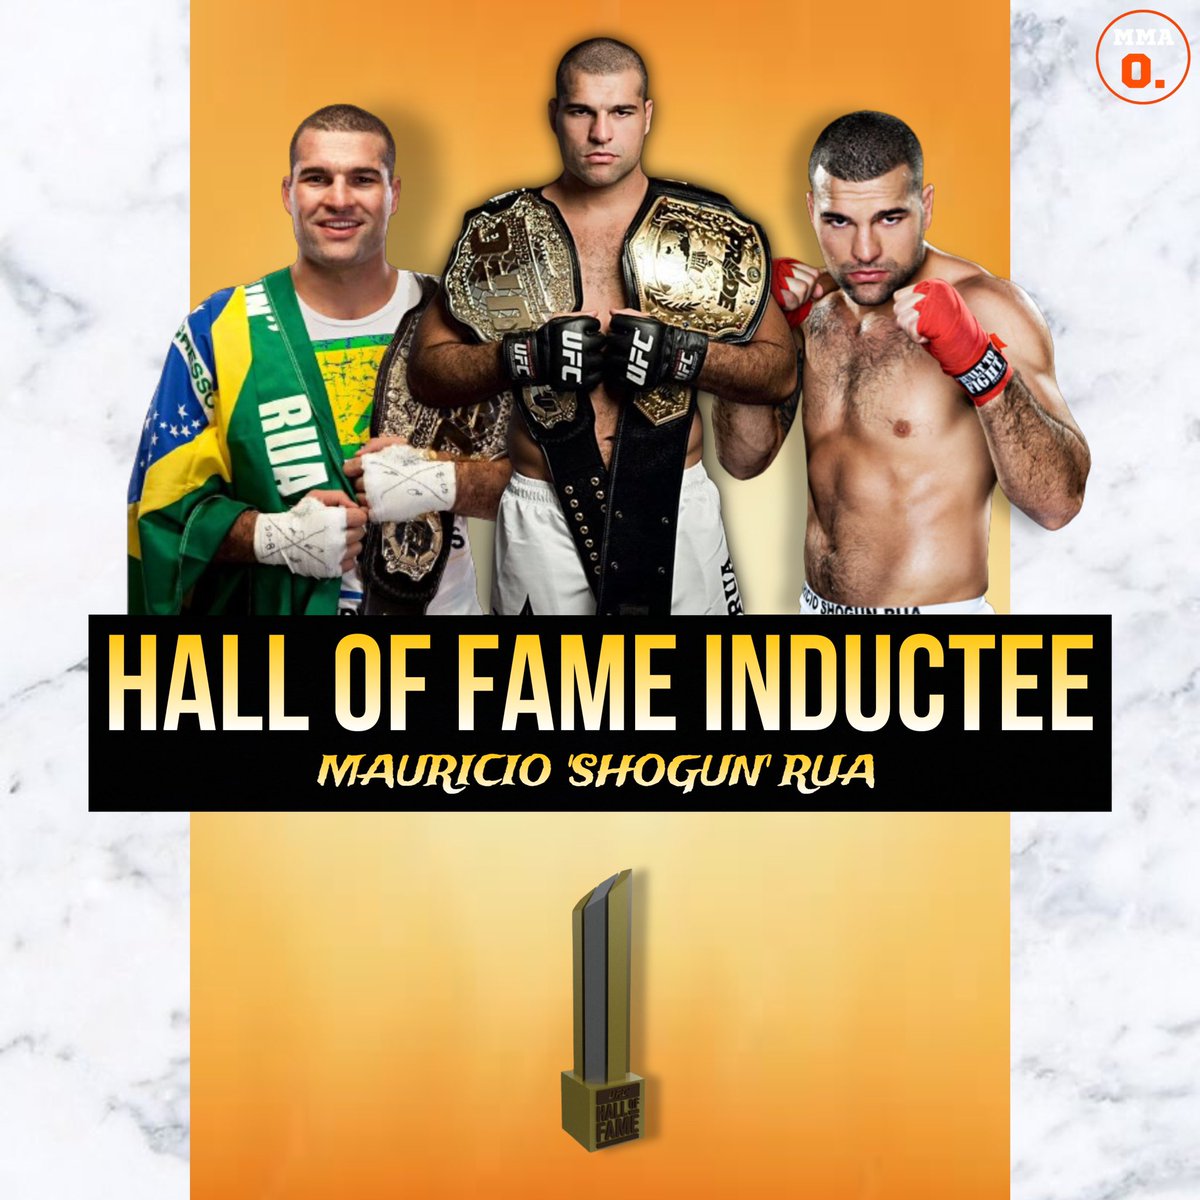 🚨| The #UFC301 broadcast has announced that Mauricio ‘Shogun’ Rua will be inducted into the UFC Hall of Fame on June 27th. 🇧🇷🏆 Congratulations legend, @ShogunRua! 👏